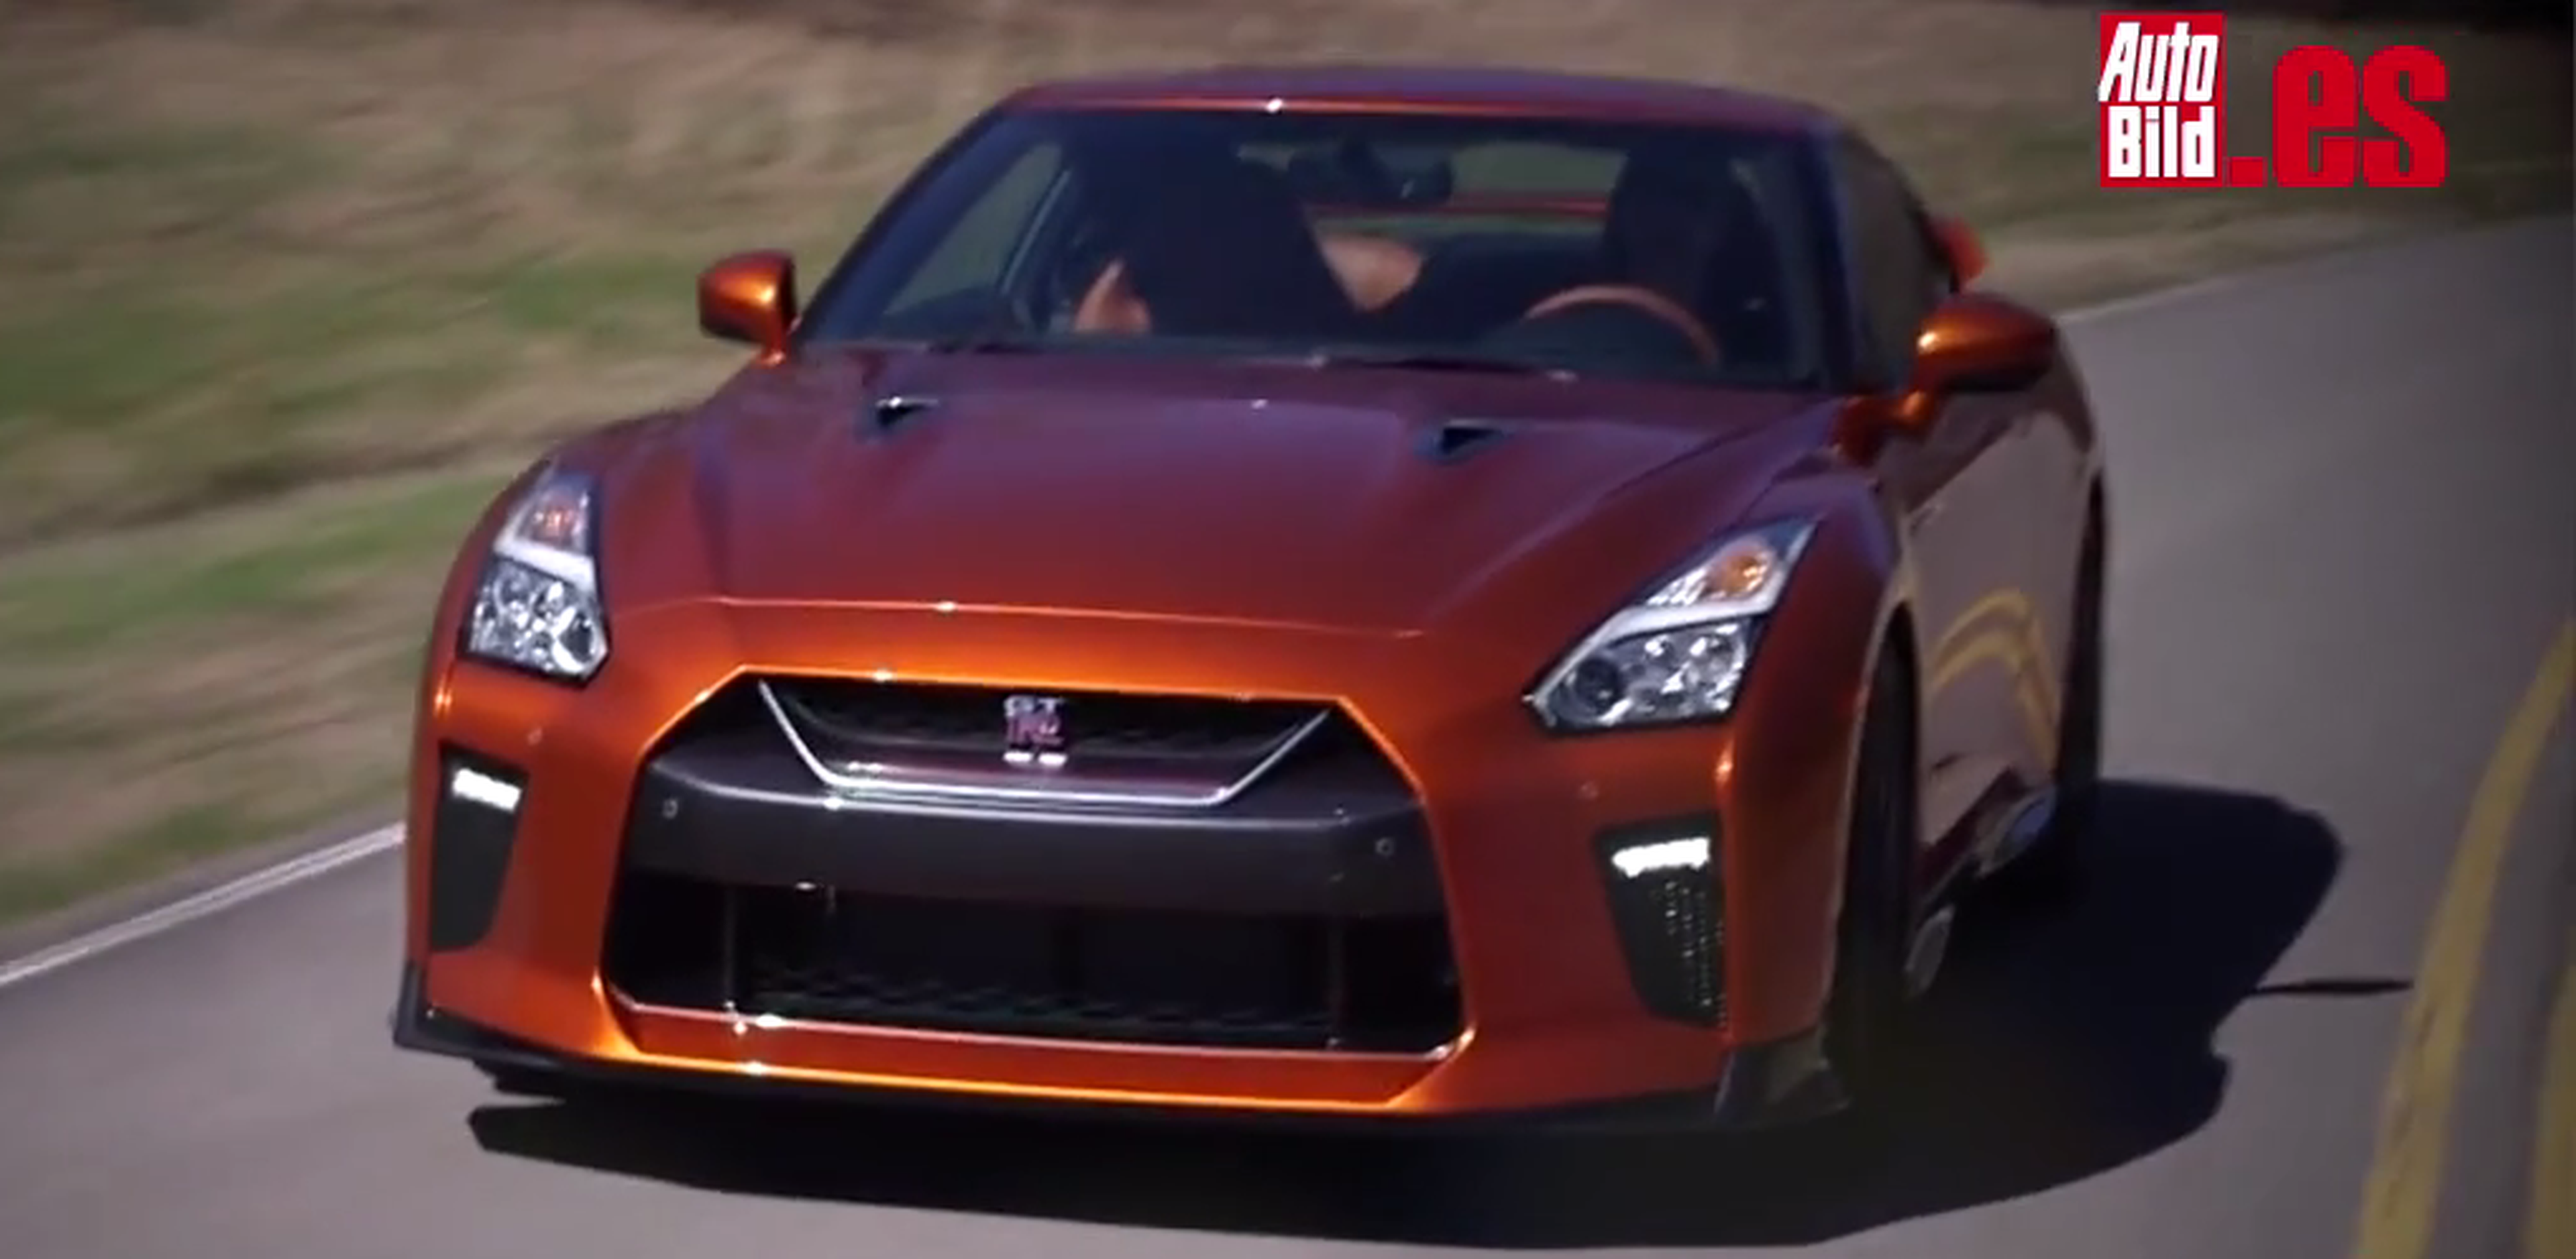 Nissan GT-R 2017: significativo 'restyling', otra vez 'top'